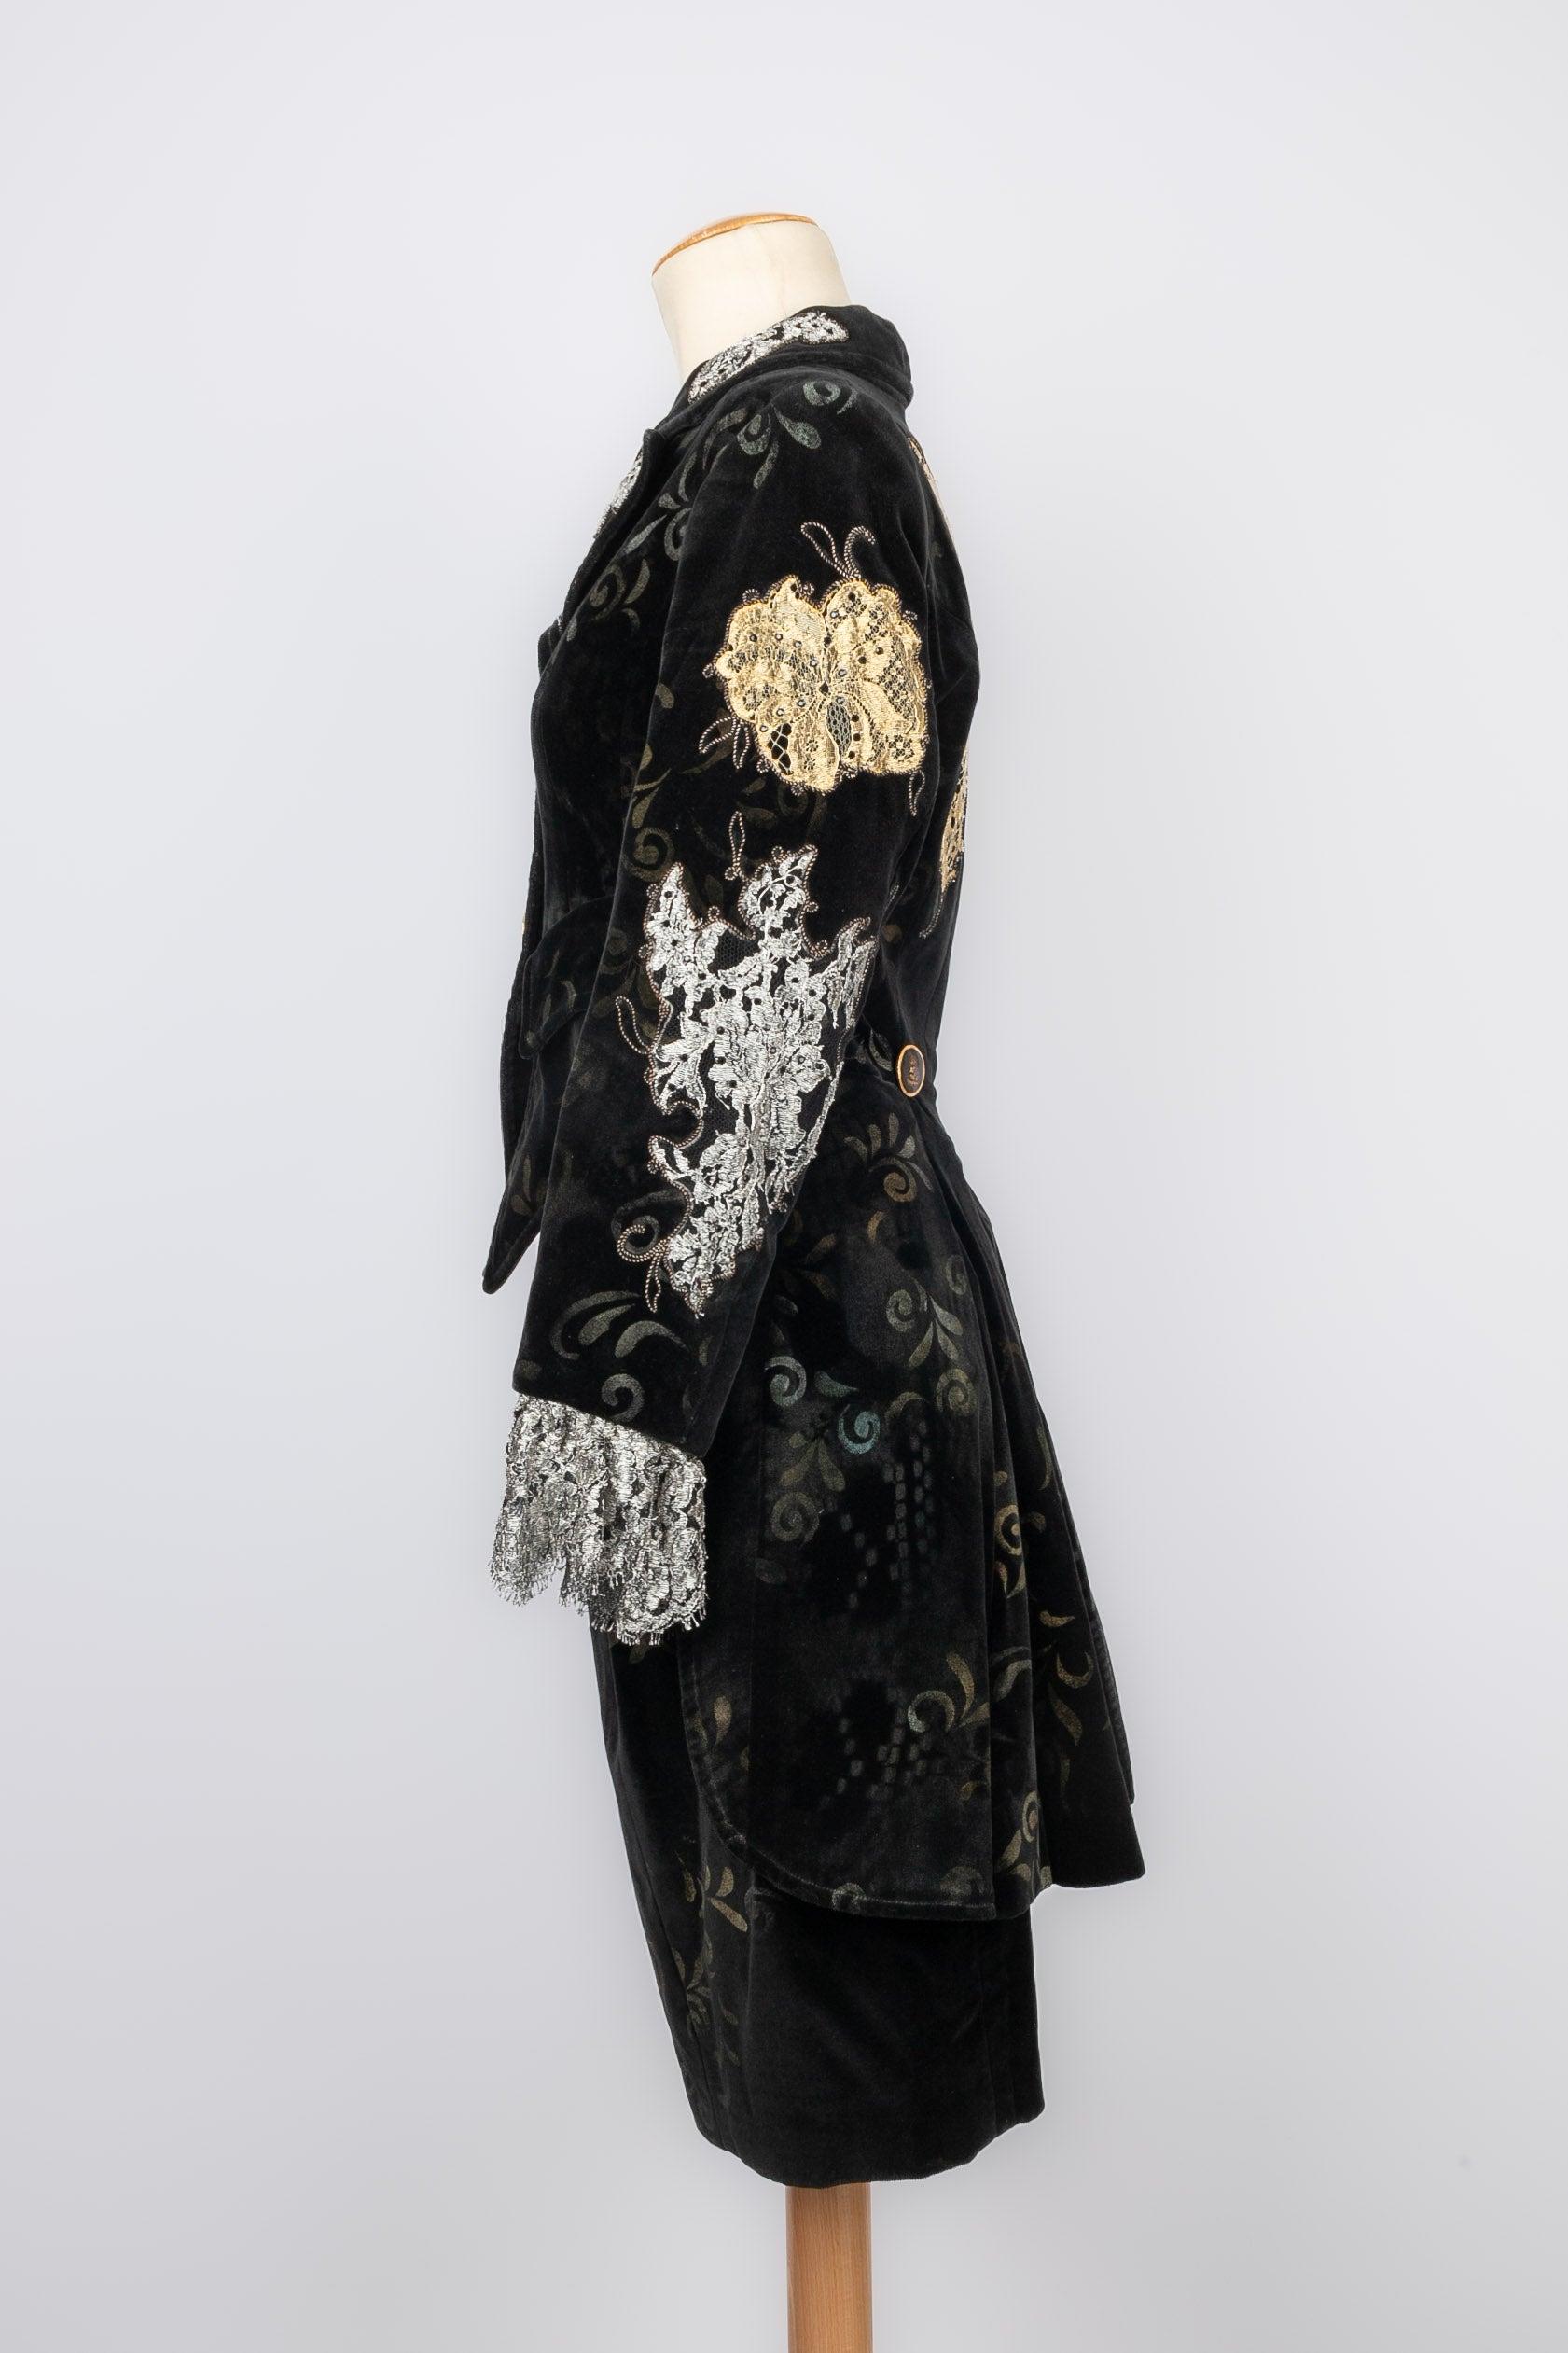 Christian Lacroix - (Made in France) Black velvet skirt suit sewn with silvery and golden embroideries. Size 38FR.

Additional information:
Condition: Very good condition
Dimensions: Jacket: Shoulder width: 42 cm - Sleeve length: 60 cm - Length: 80